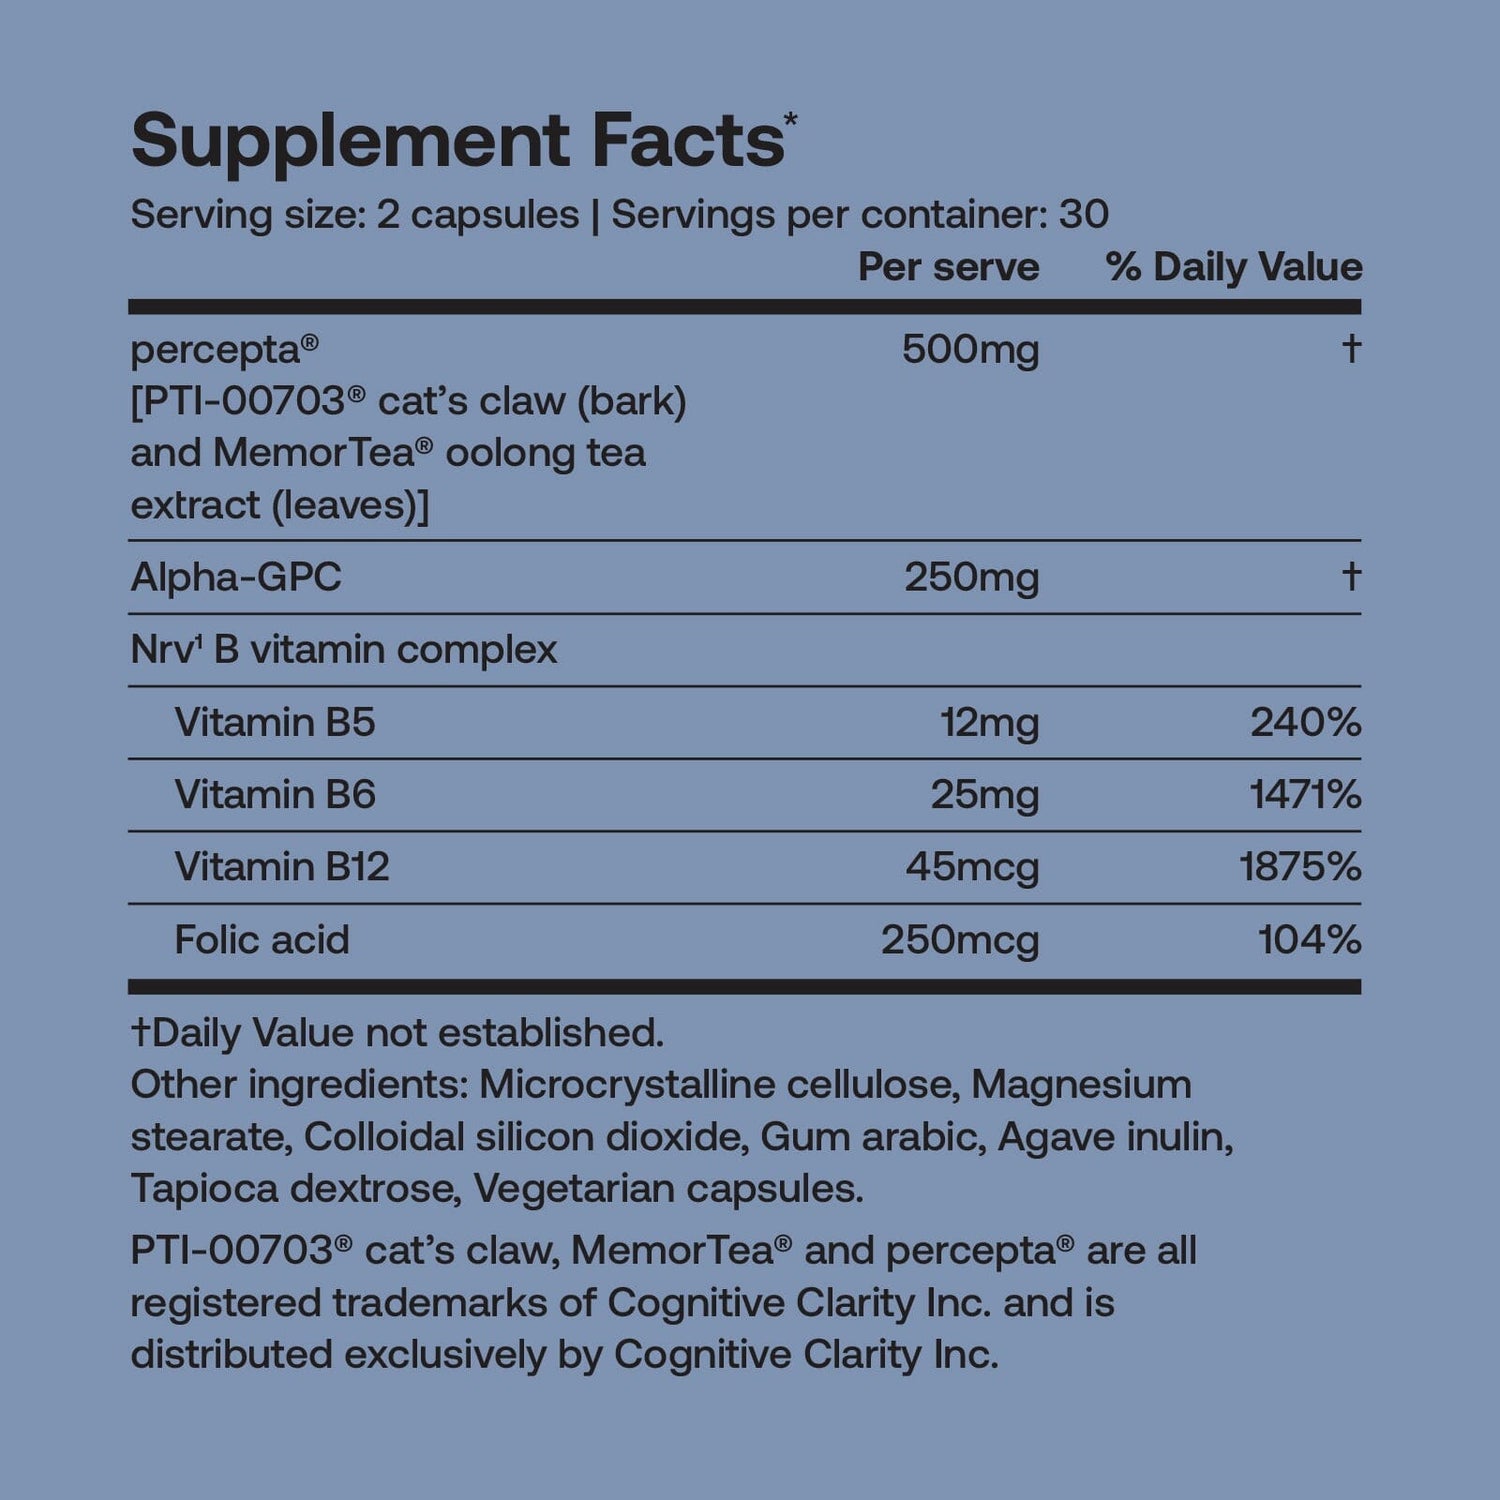 Nrv¹ Focus - Anti-Aging Supplement From SRW | Improves Brain Functions